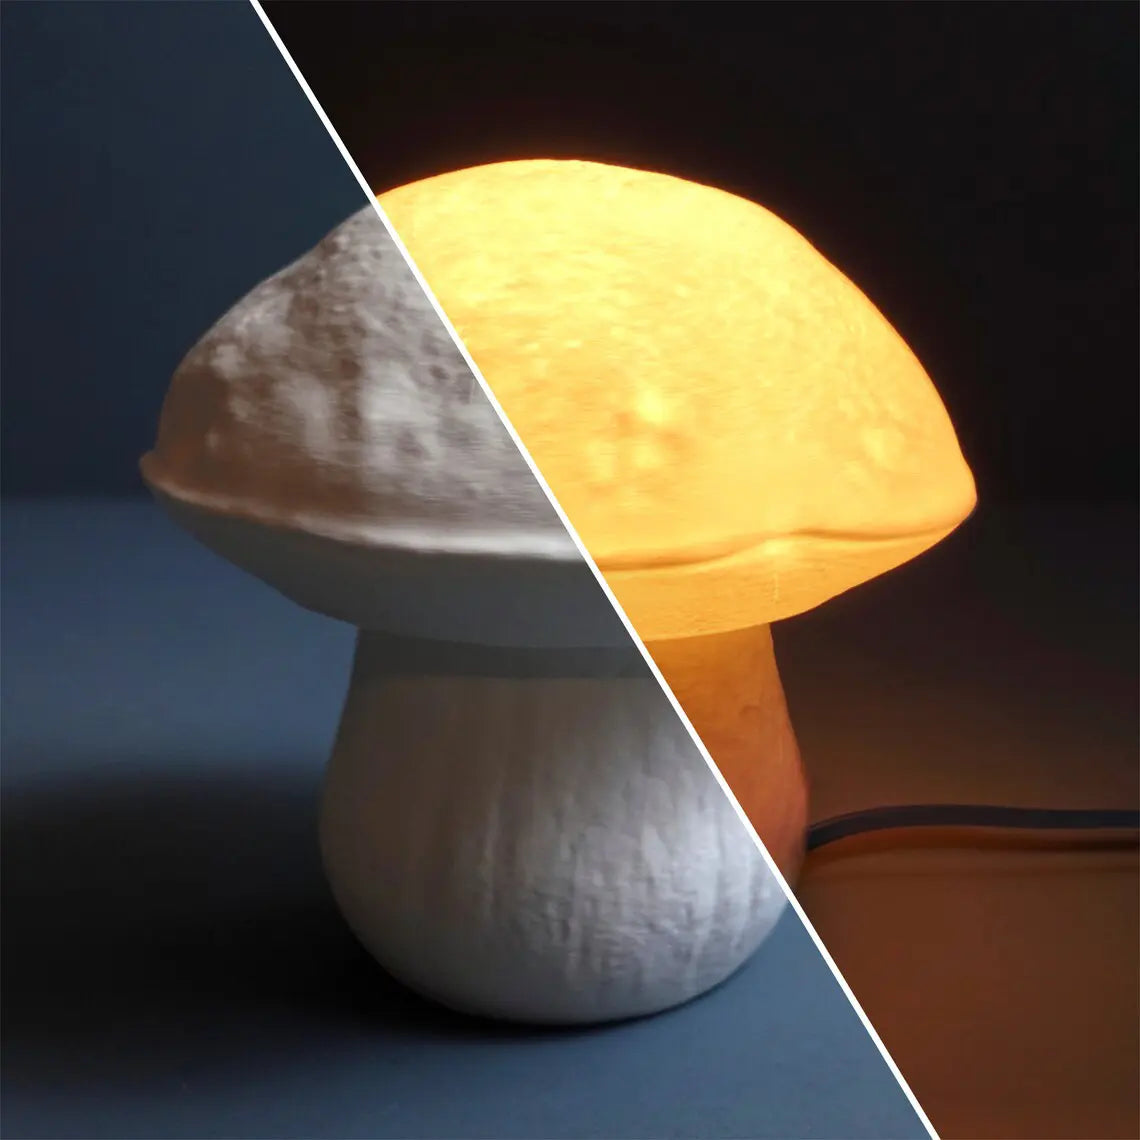 Edulis Fungus Table Lamp - Small Organic Mushroom Design in cotton white color. Half image on and half image off.